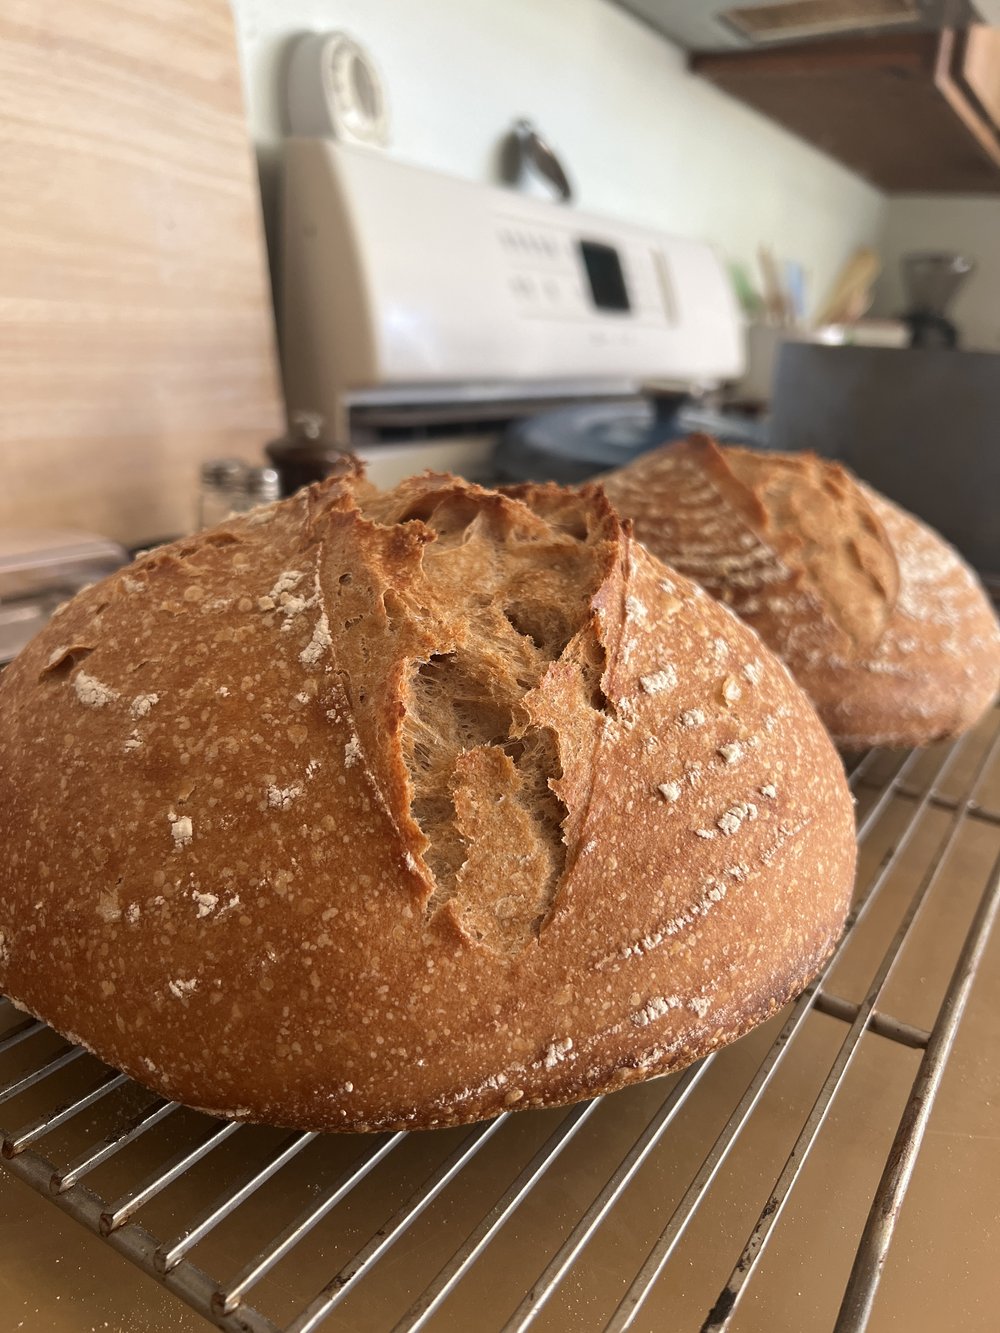 Working on my bread game